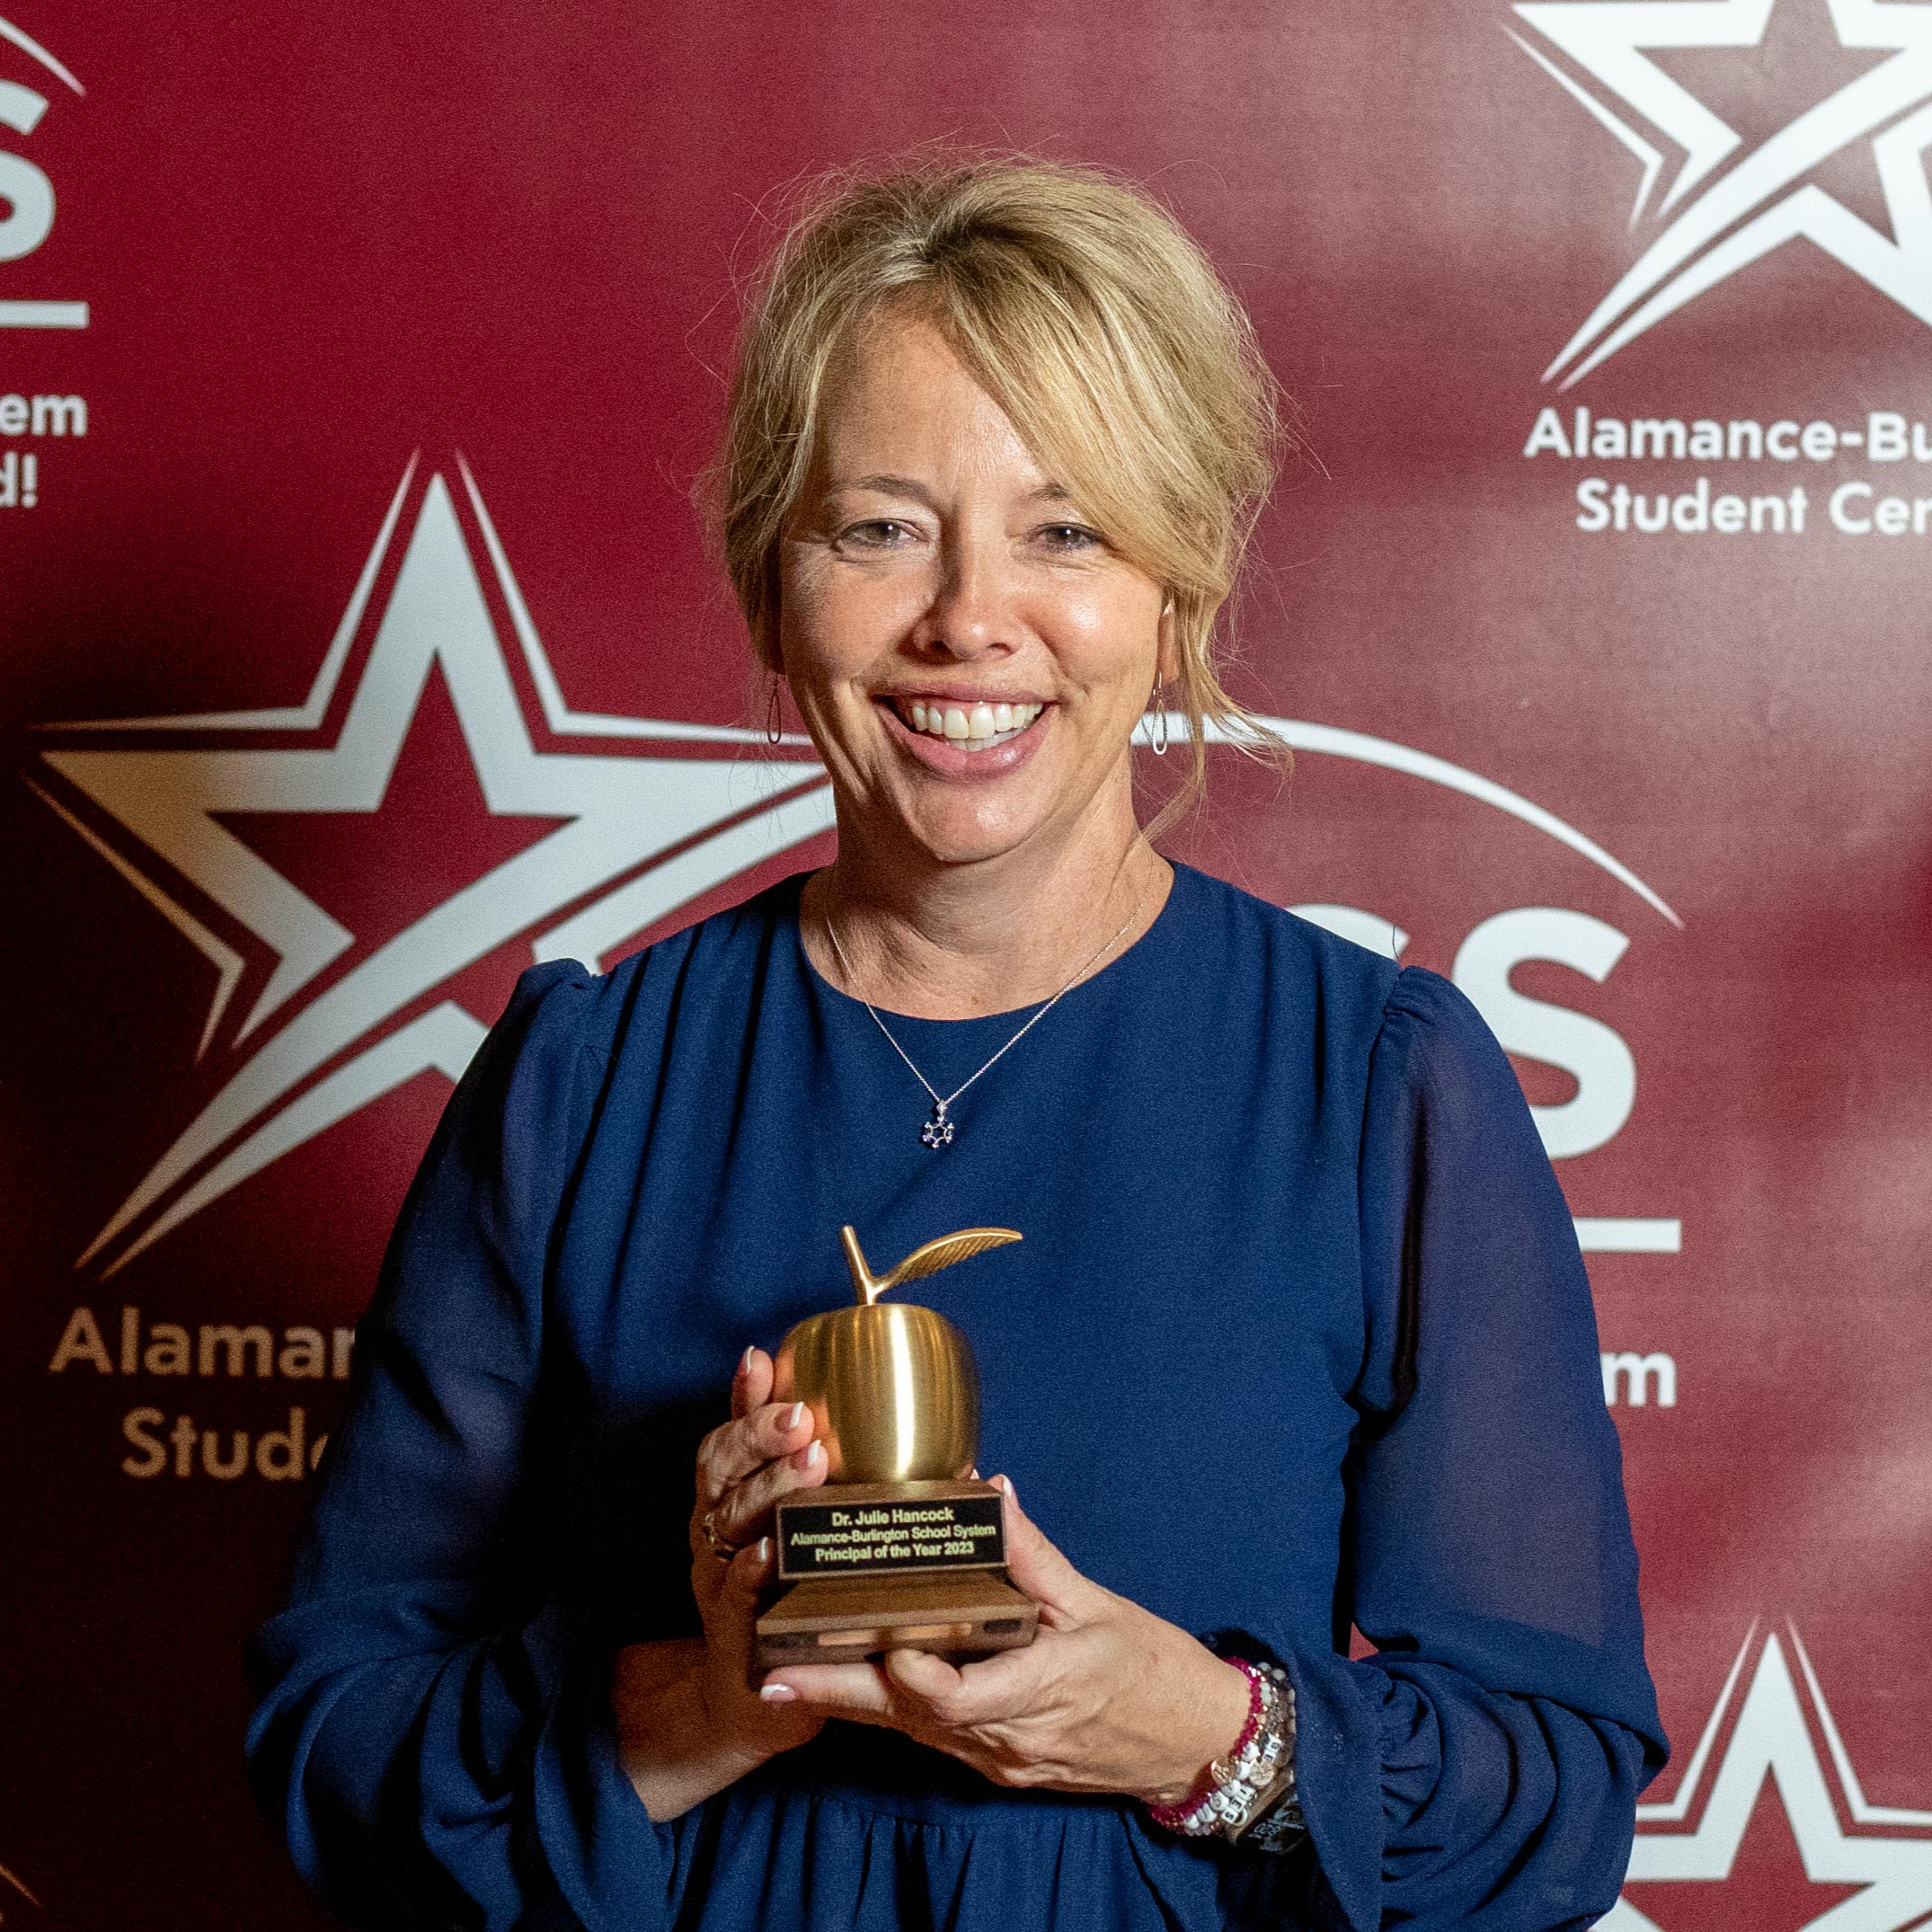 Dr. Julie Hancock, ABSS Principal of the Year holding Golden Apple Trophy in front of a burgundy ABSS background